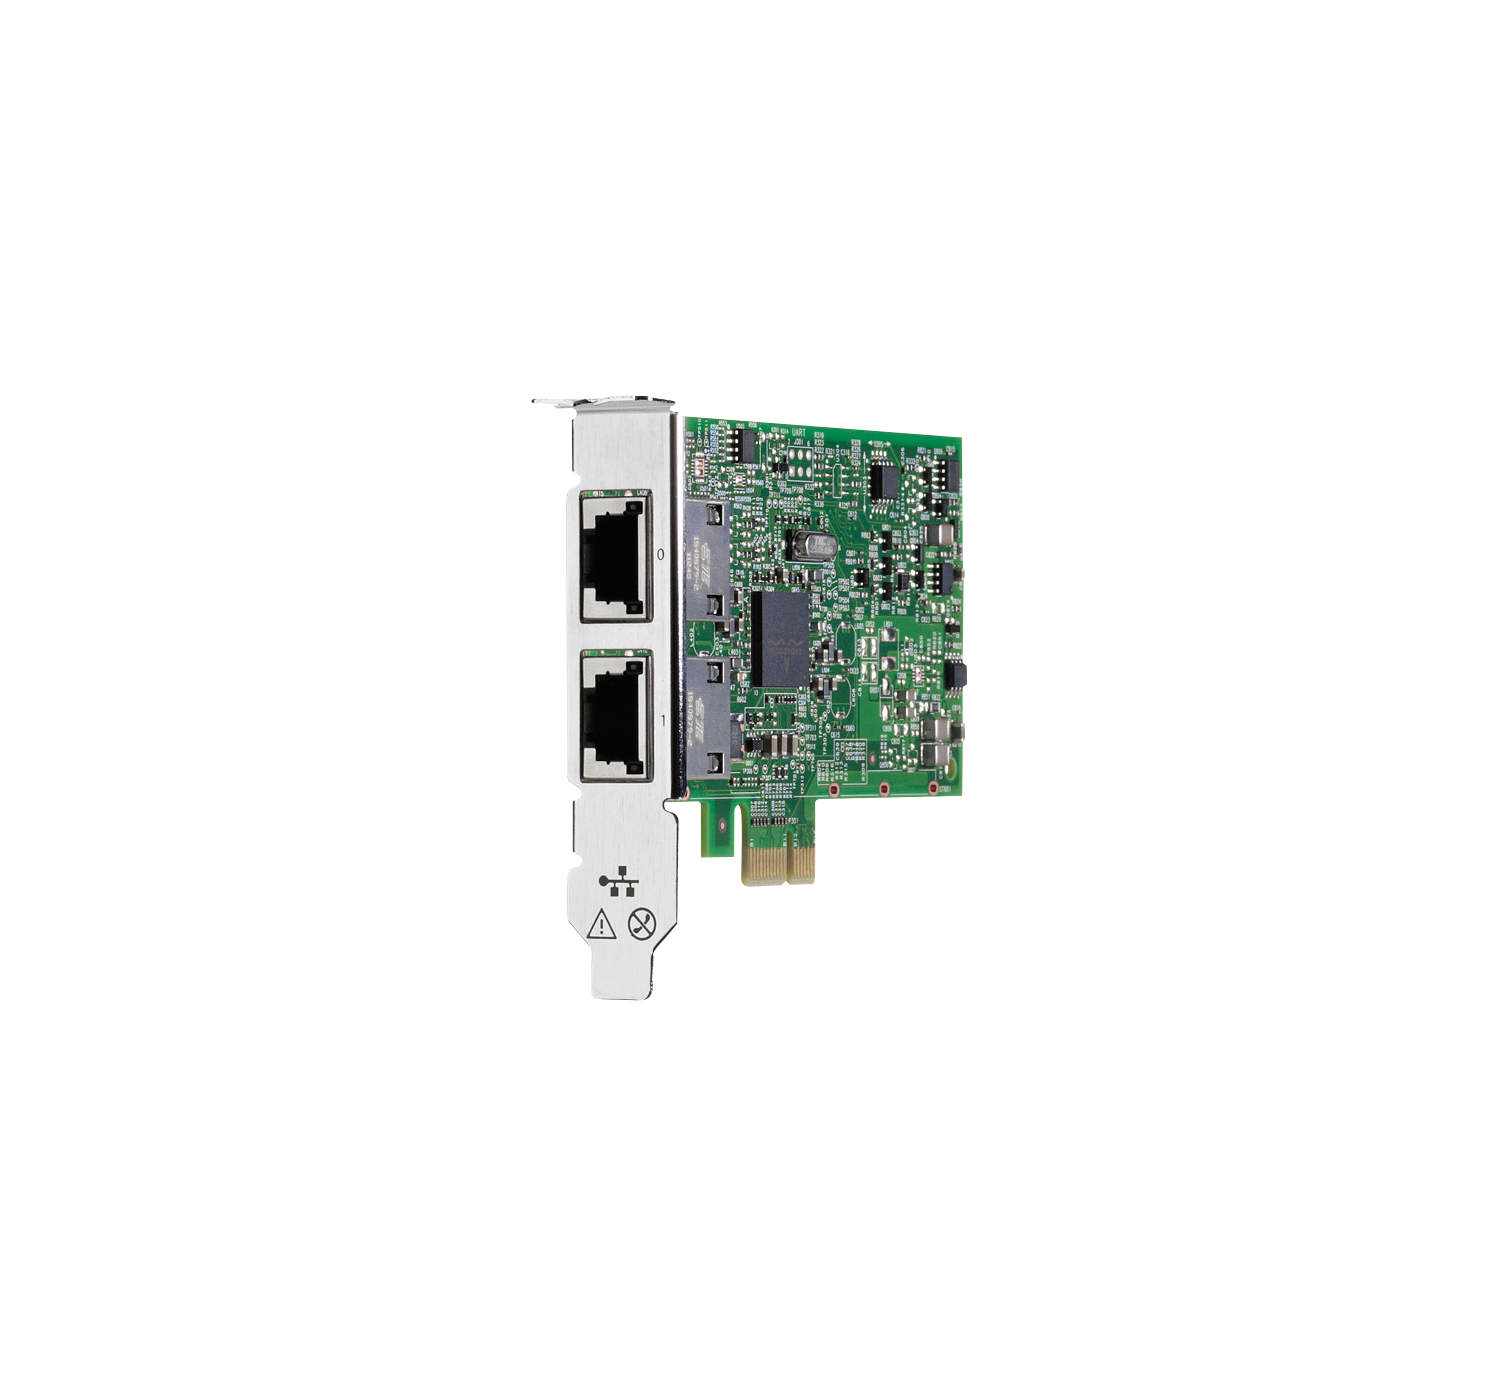 HPE Ethernet 1Gb 2-port BASE-T BCM5720 Adapter